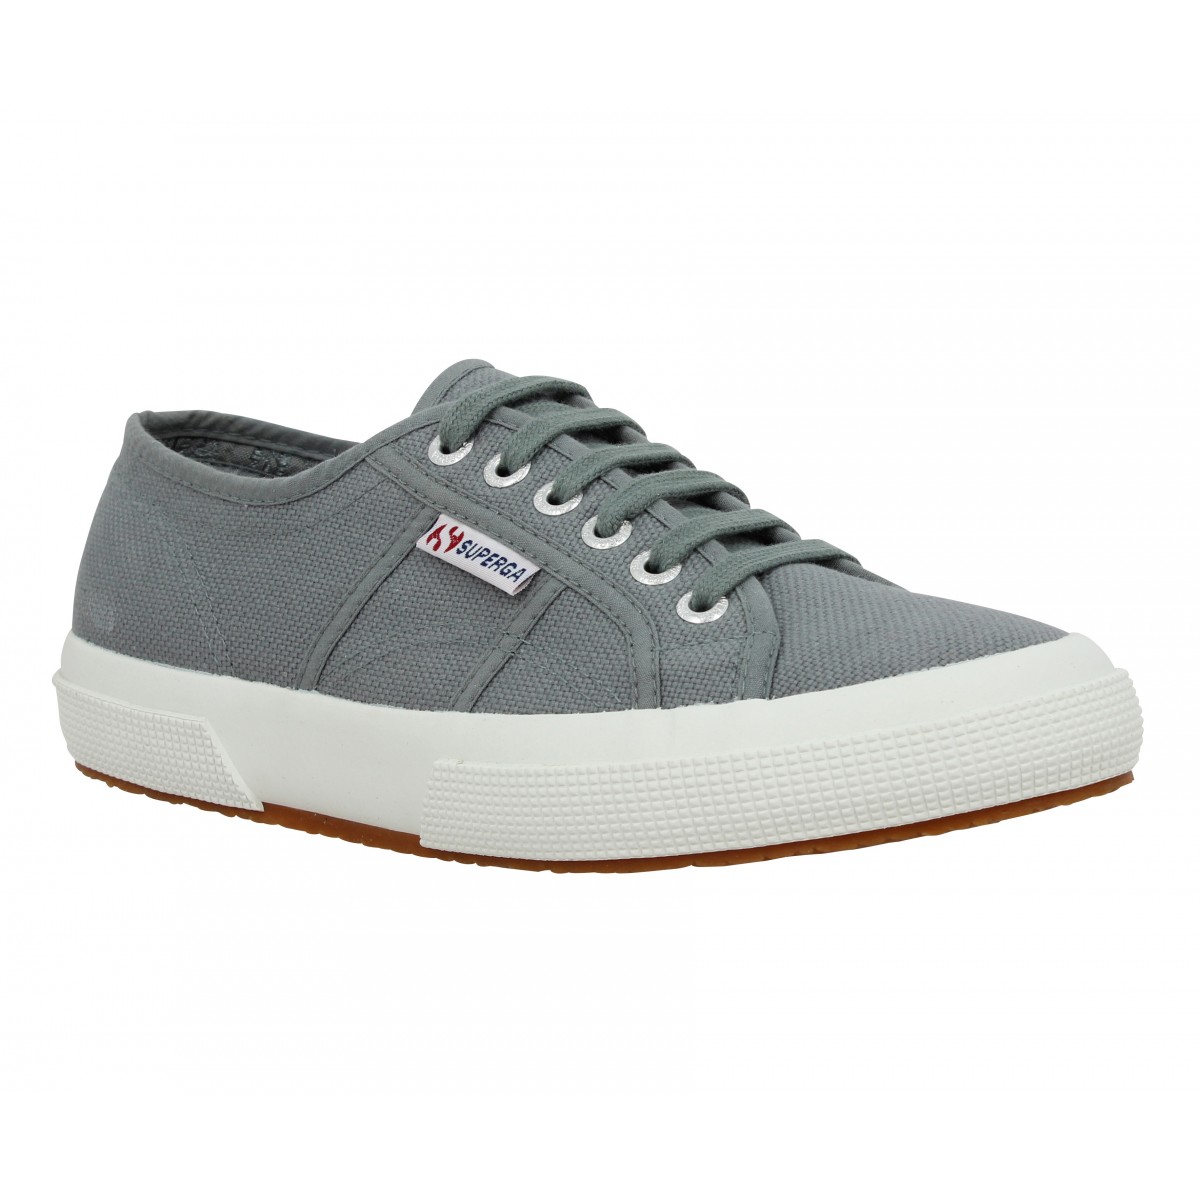 Chaussures Superga 2750 femme gris | Fanny chaussures